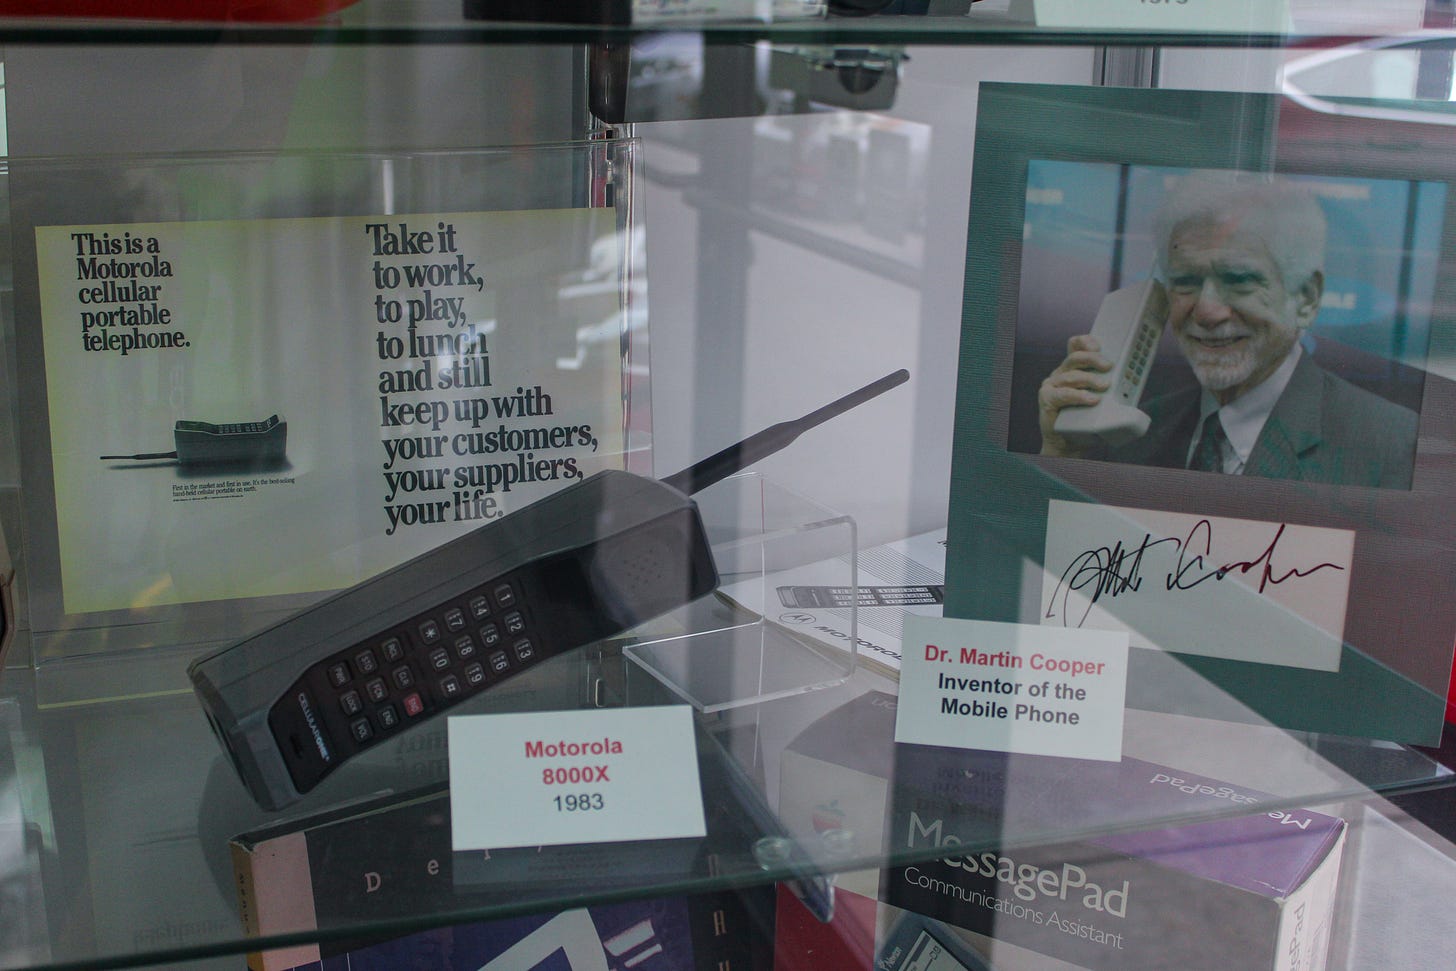 A Motorola 8000X phone and an autographed photo of Martin Cooper in a glass display case